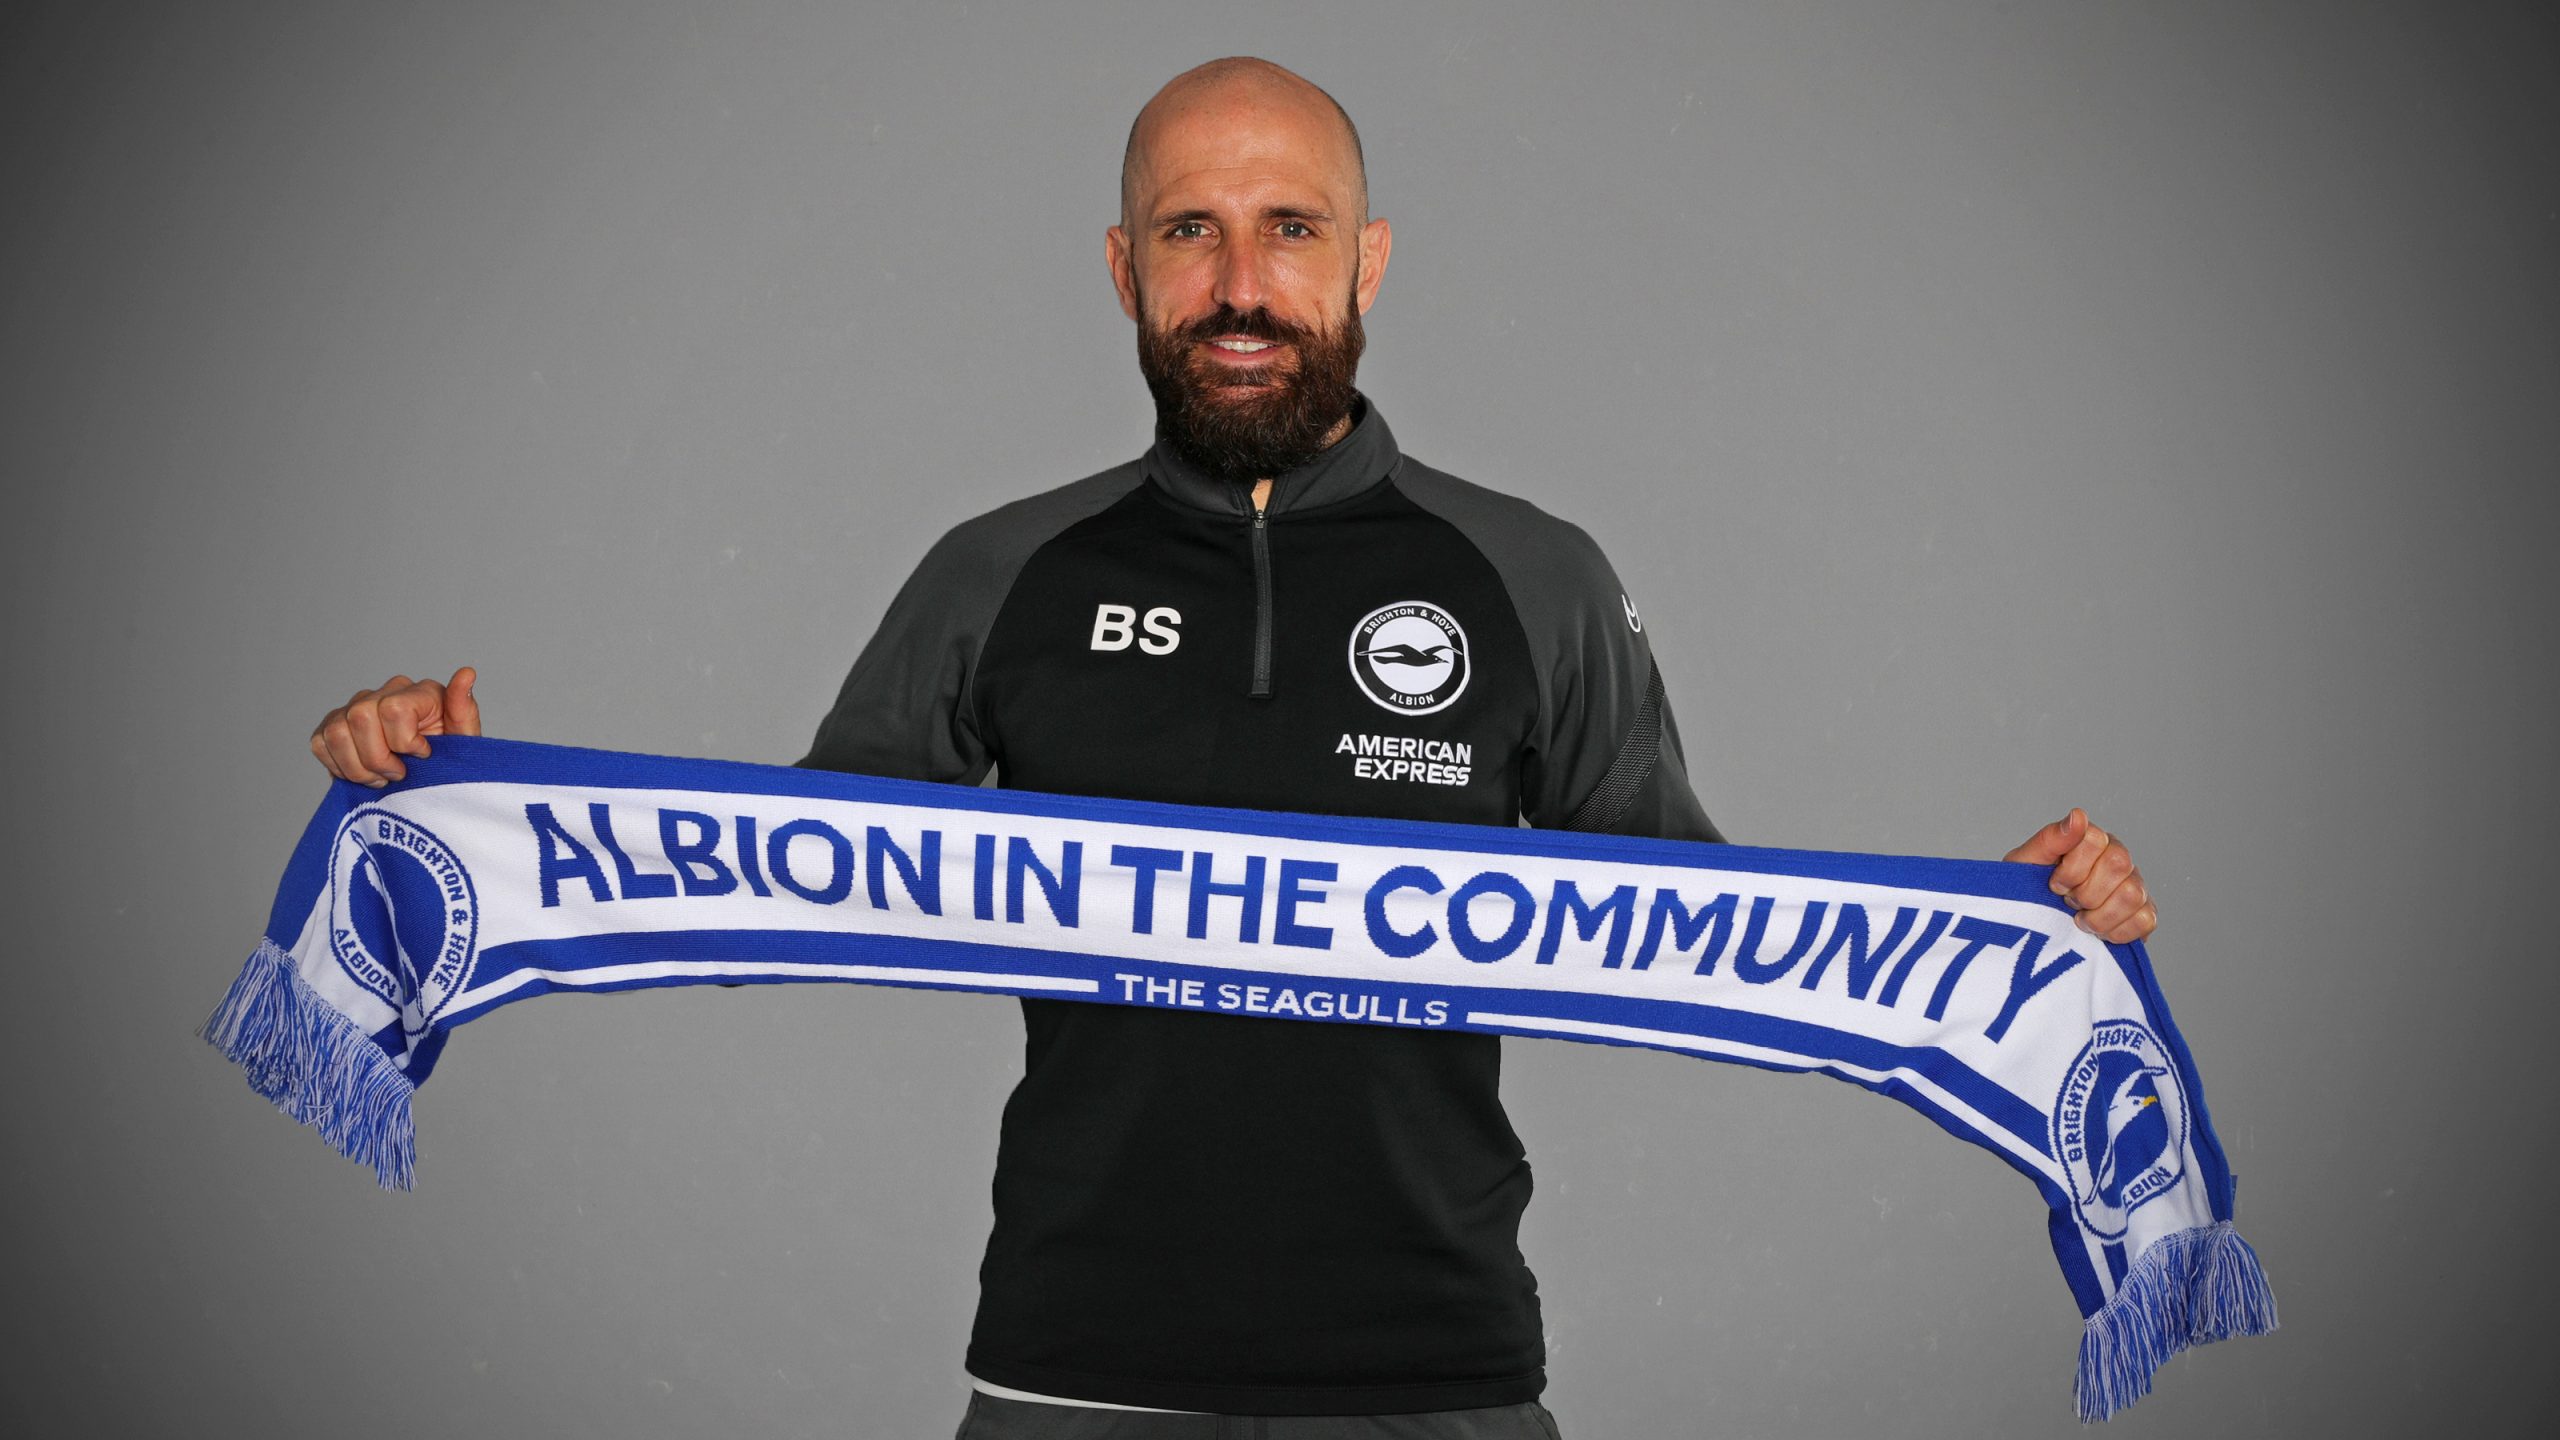 Bruno Saltor holding a Become a Community Champion scarf